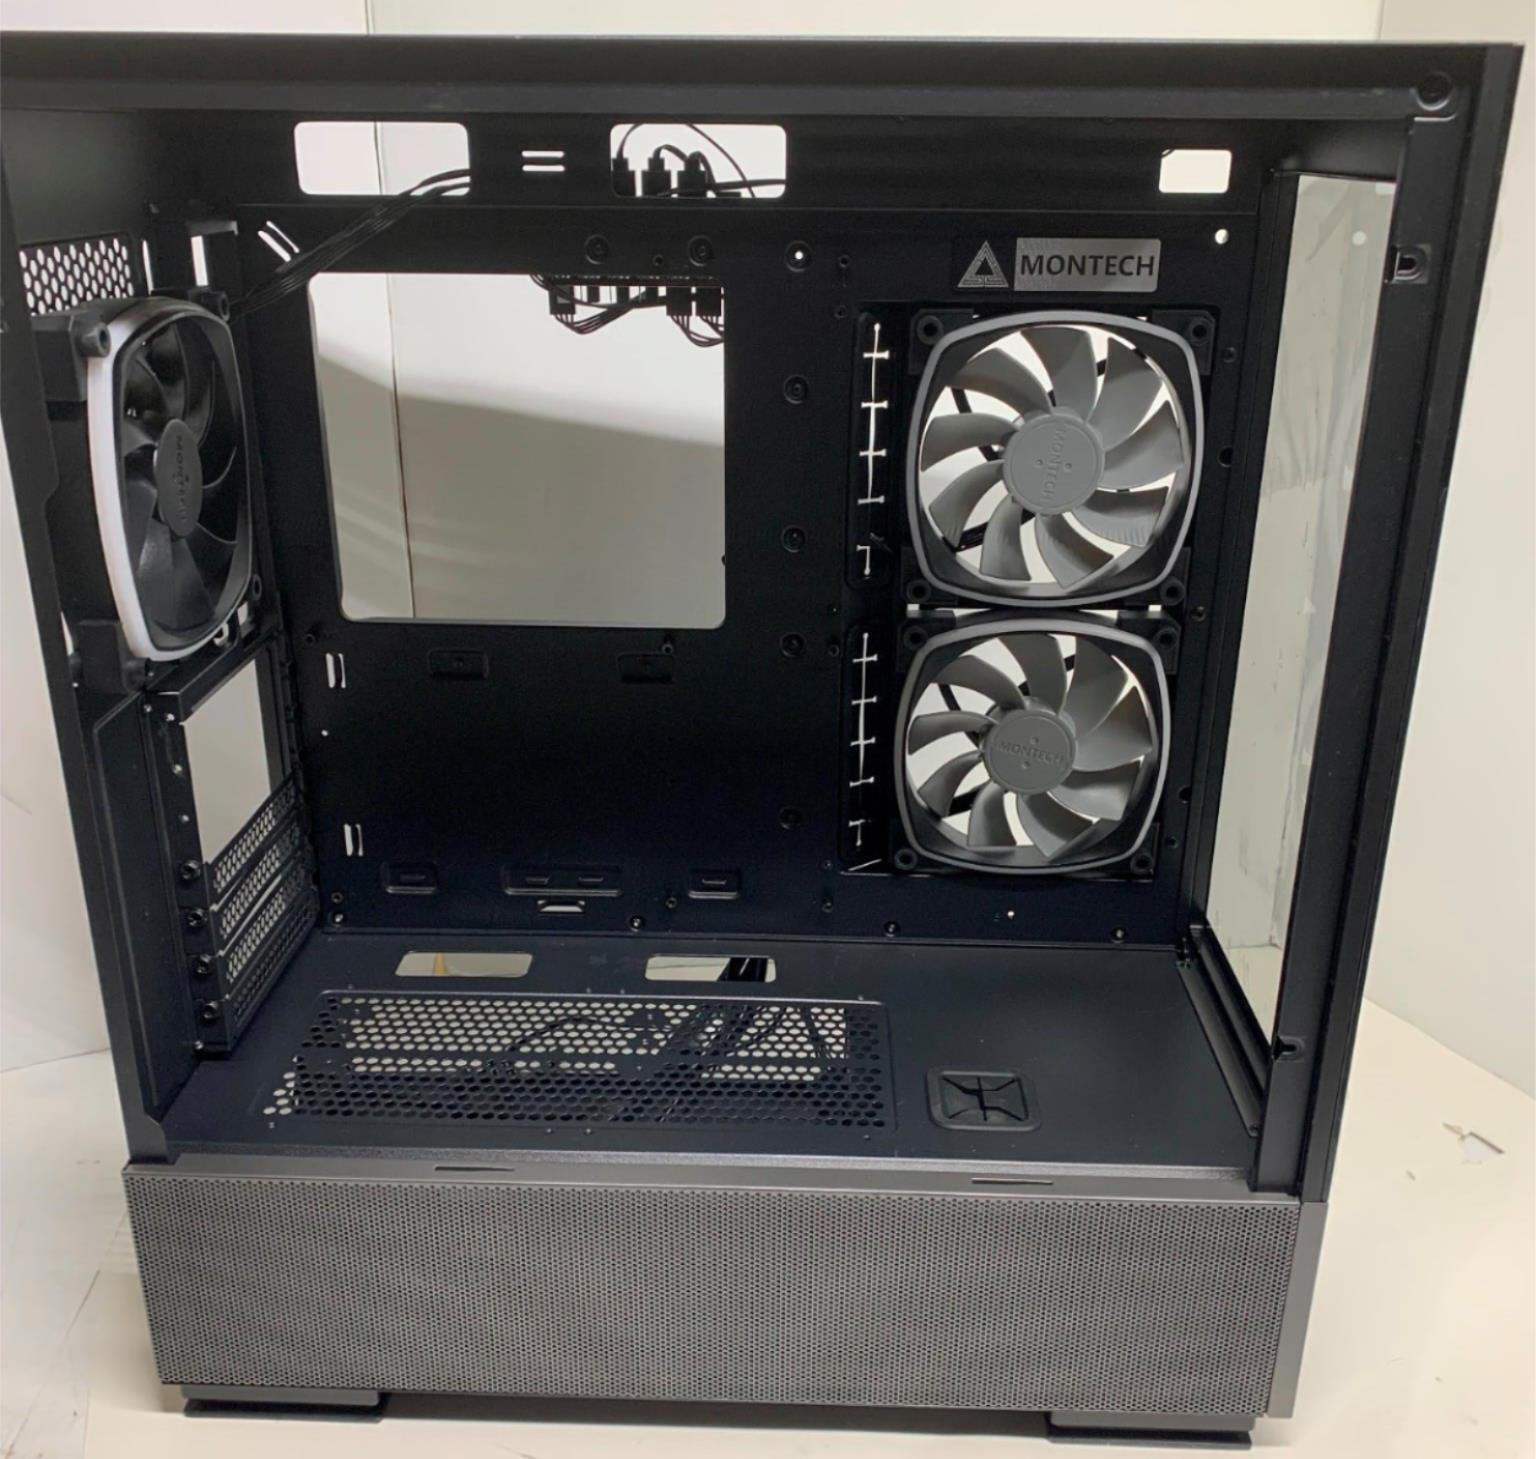 Montech Sky Two, Dual Tempered Glass, 3X PWM ARGB Fans Pre-Installed, ATX Gaming